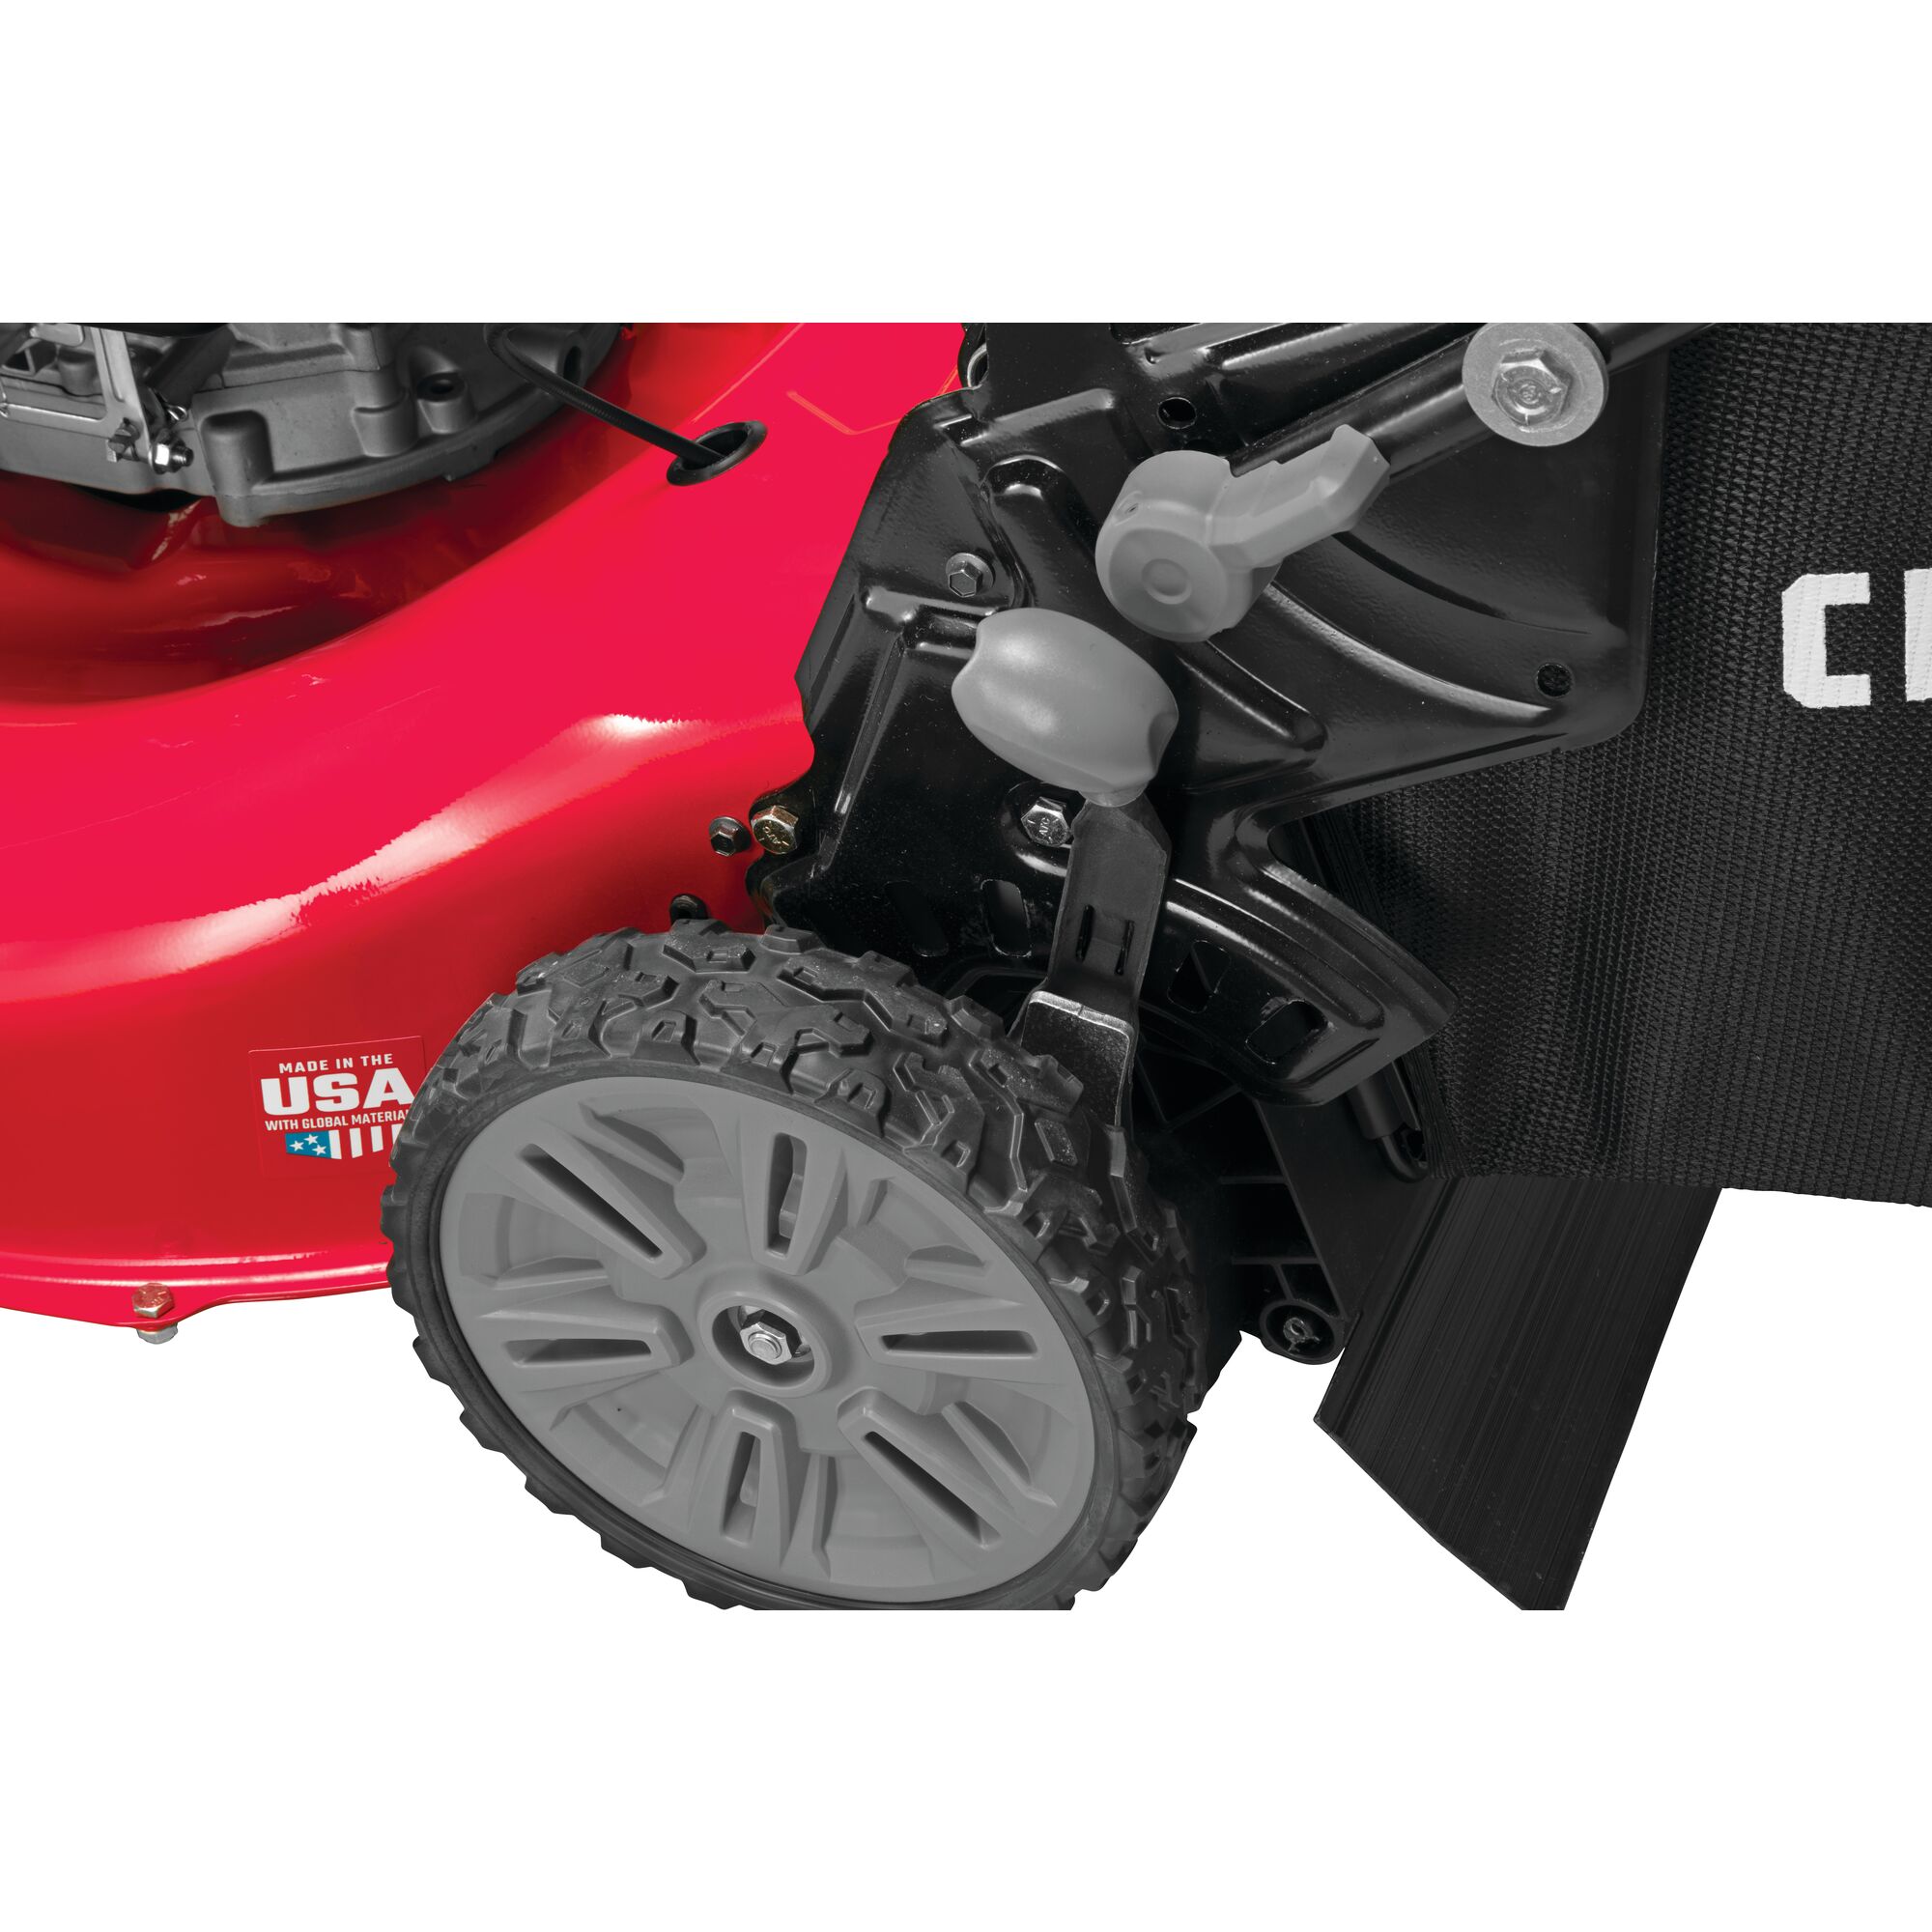 CRAFTSMAN M355 Self Propelled Lawn Mower on white background